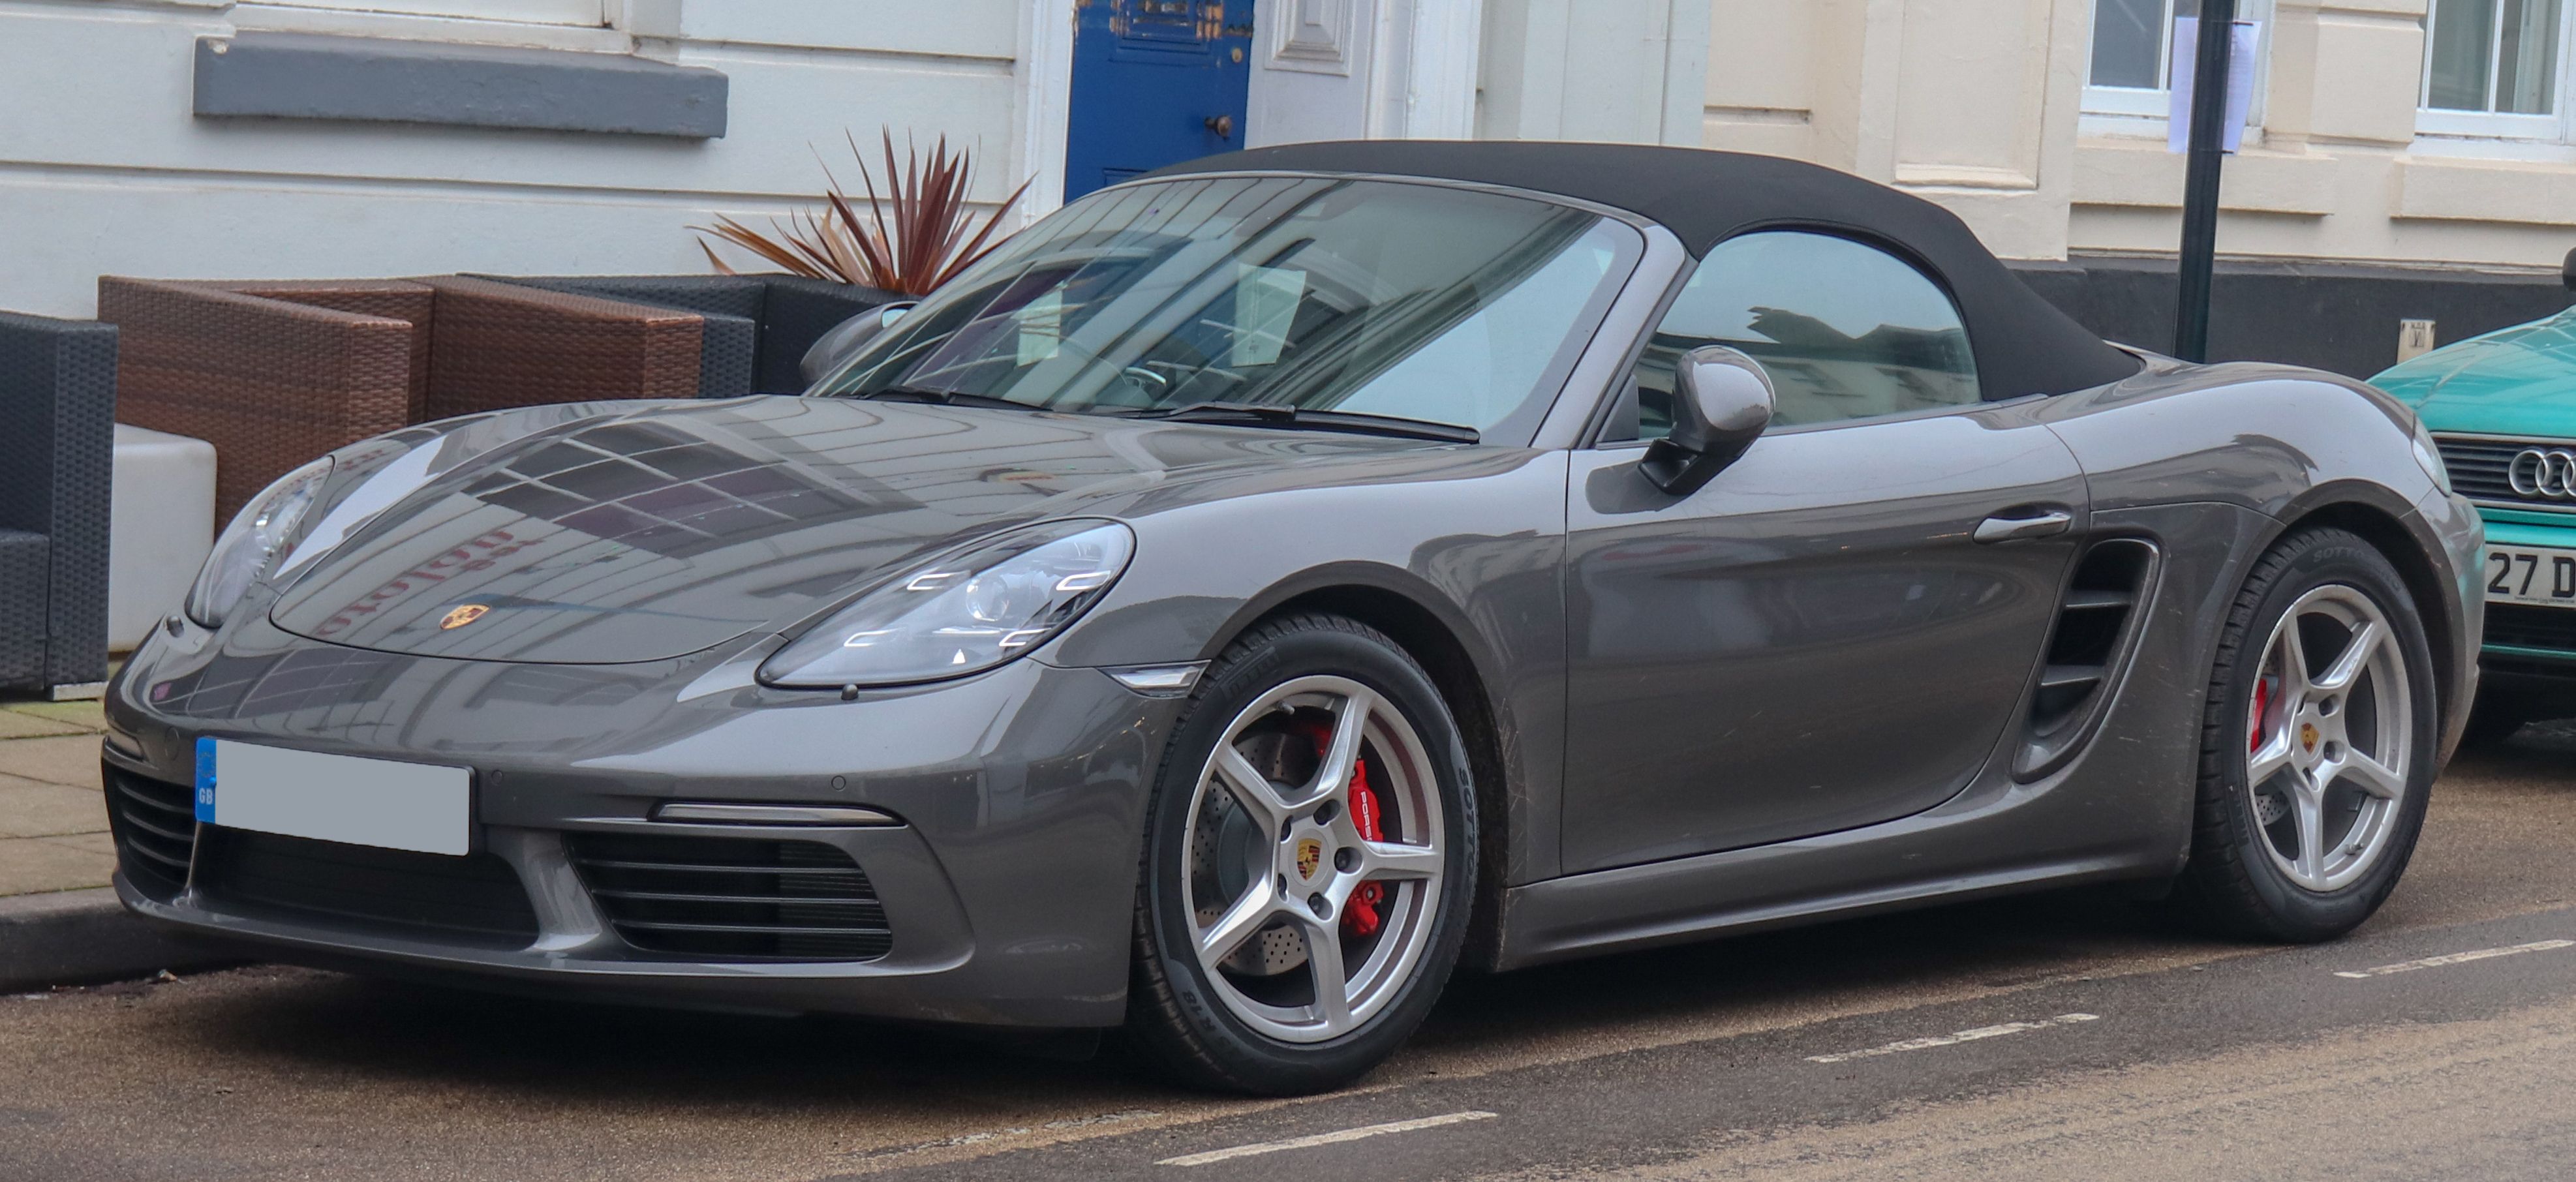 Silver Porsche Boxster, front and side view